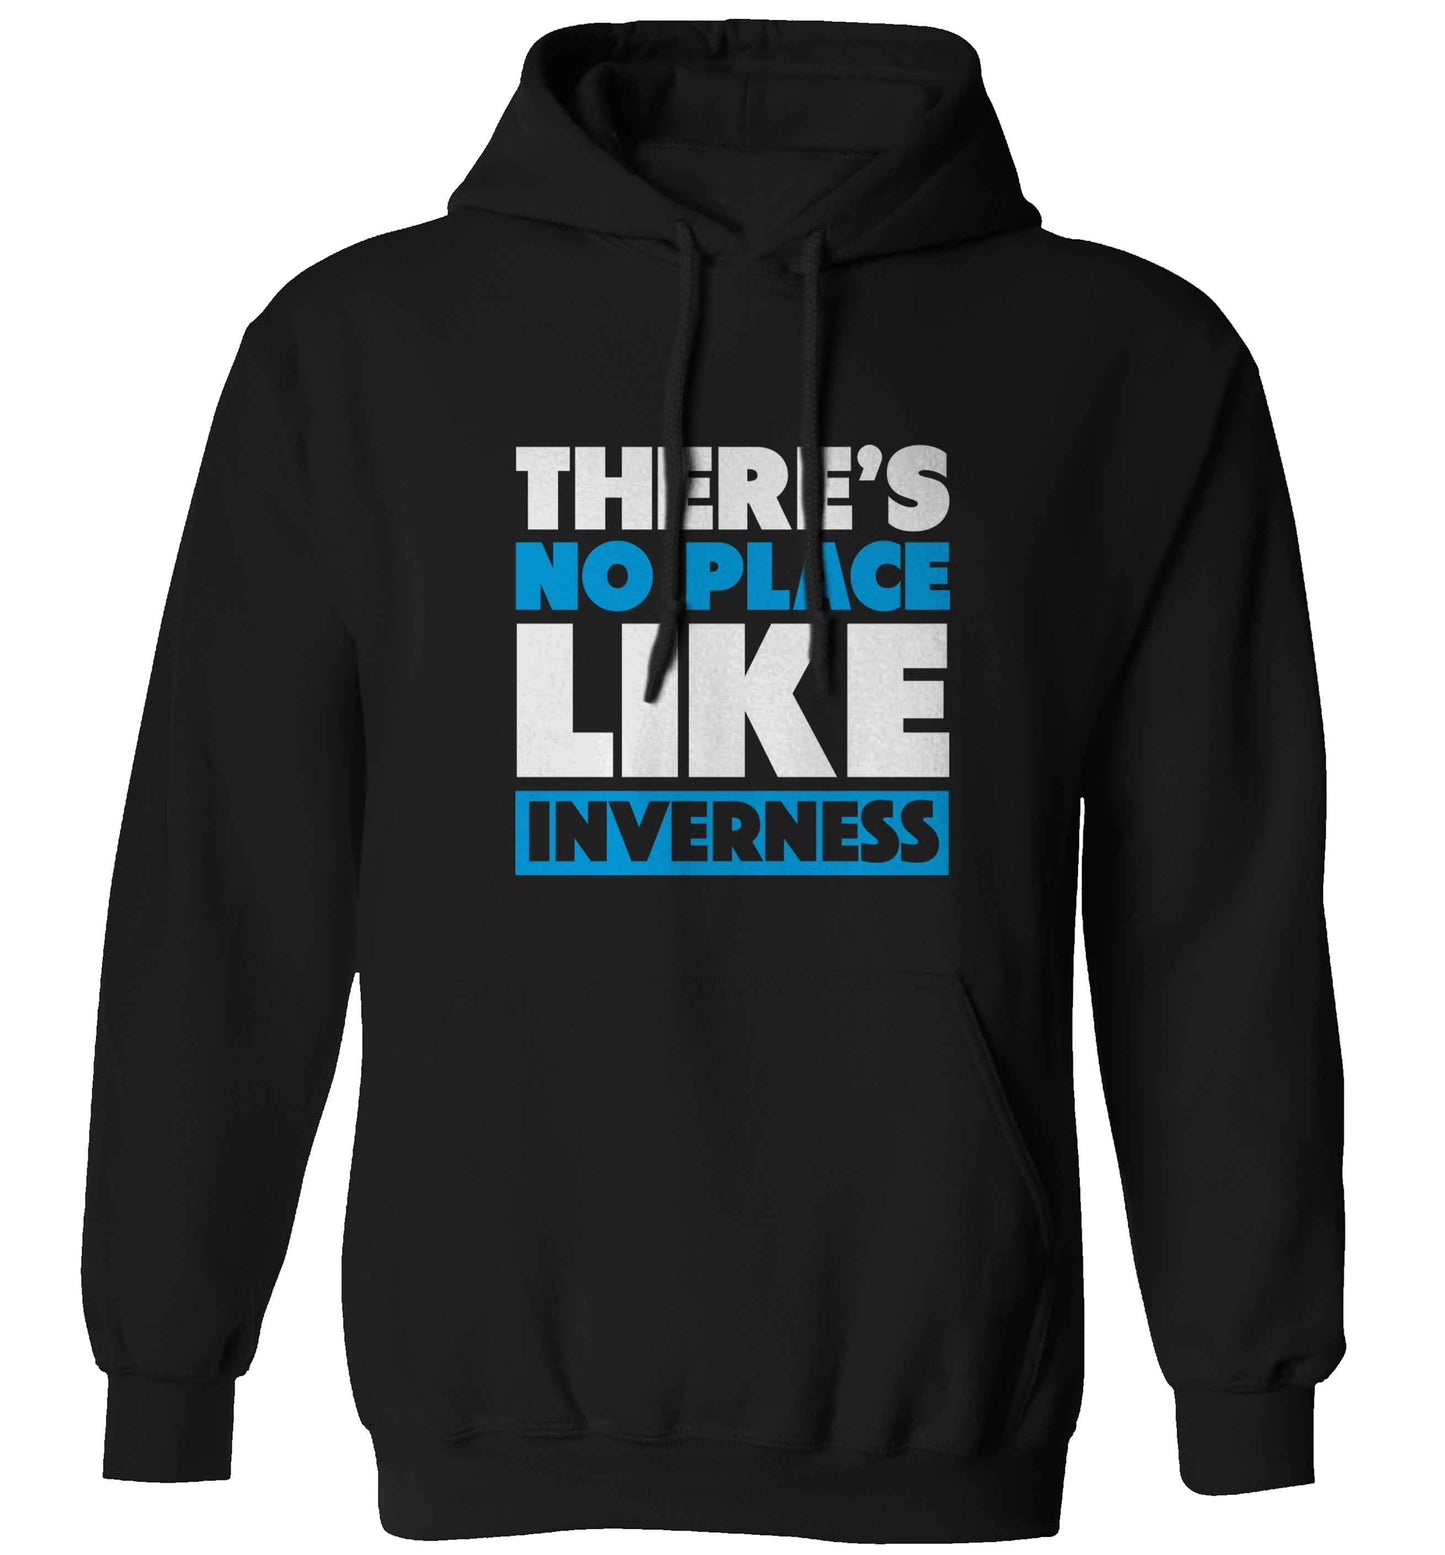 There's no place like Inverness adults unisex black hoodie 2XL